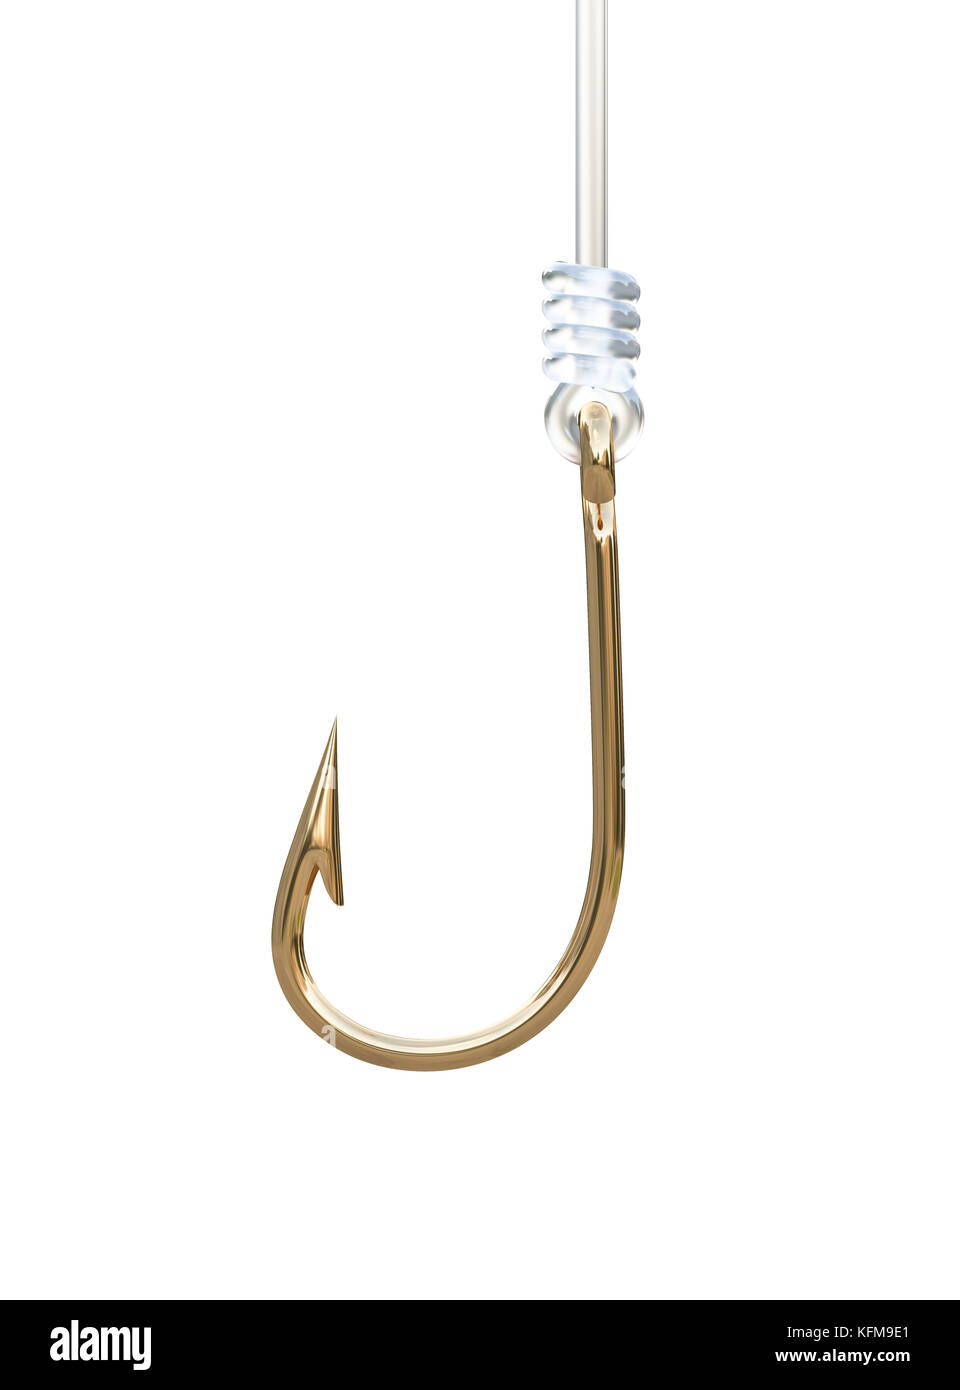 Shiny golden fishing hook hanging on the fishing line. Isolated 3d